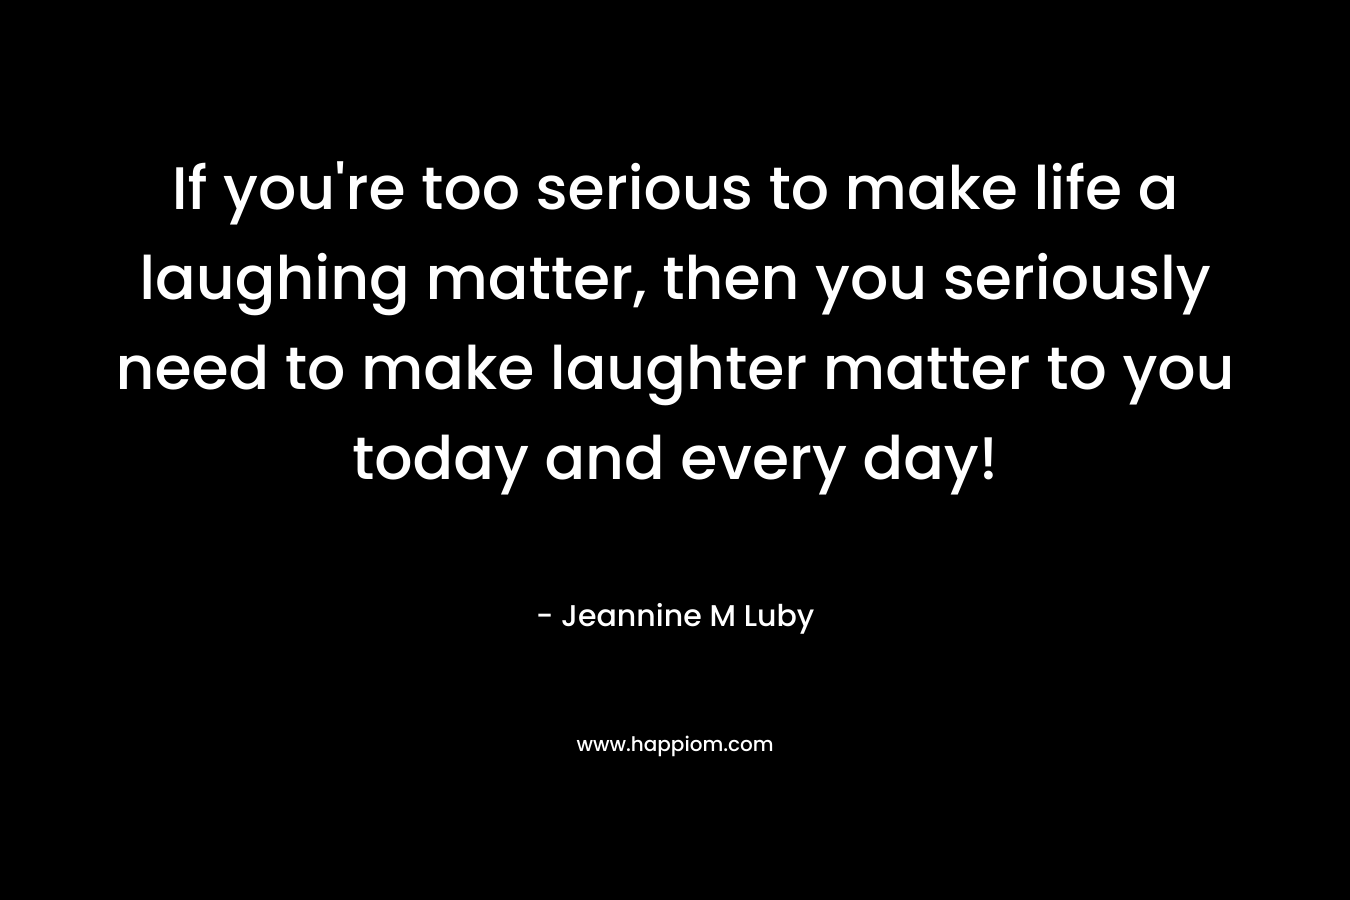 If you’re too serious to make life a laughing matter, then you seriously need to make laughter matter to you today and every day! – Jeannine M Luby